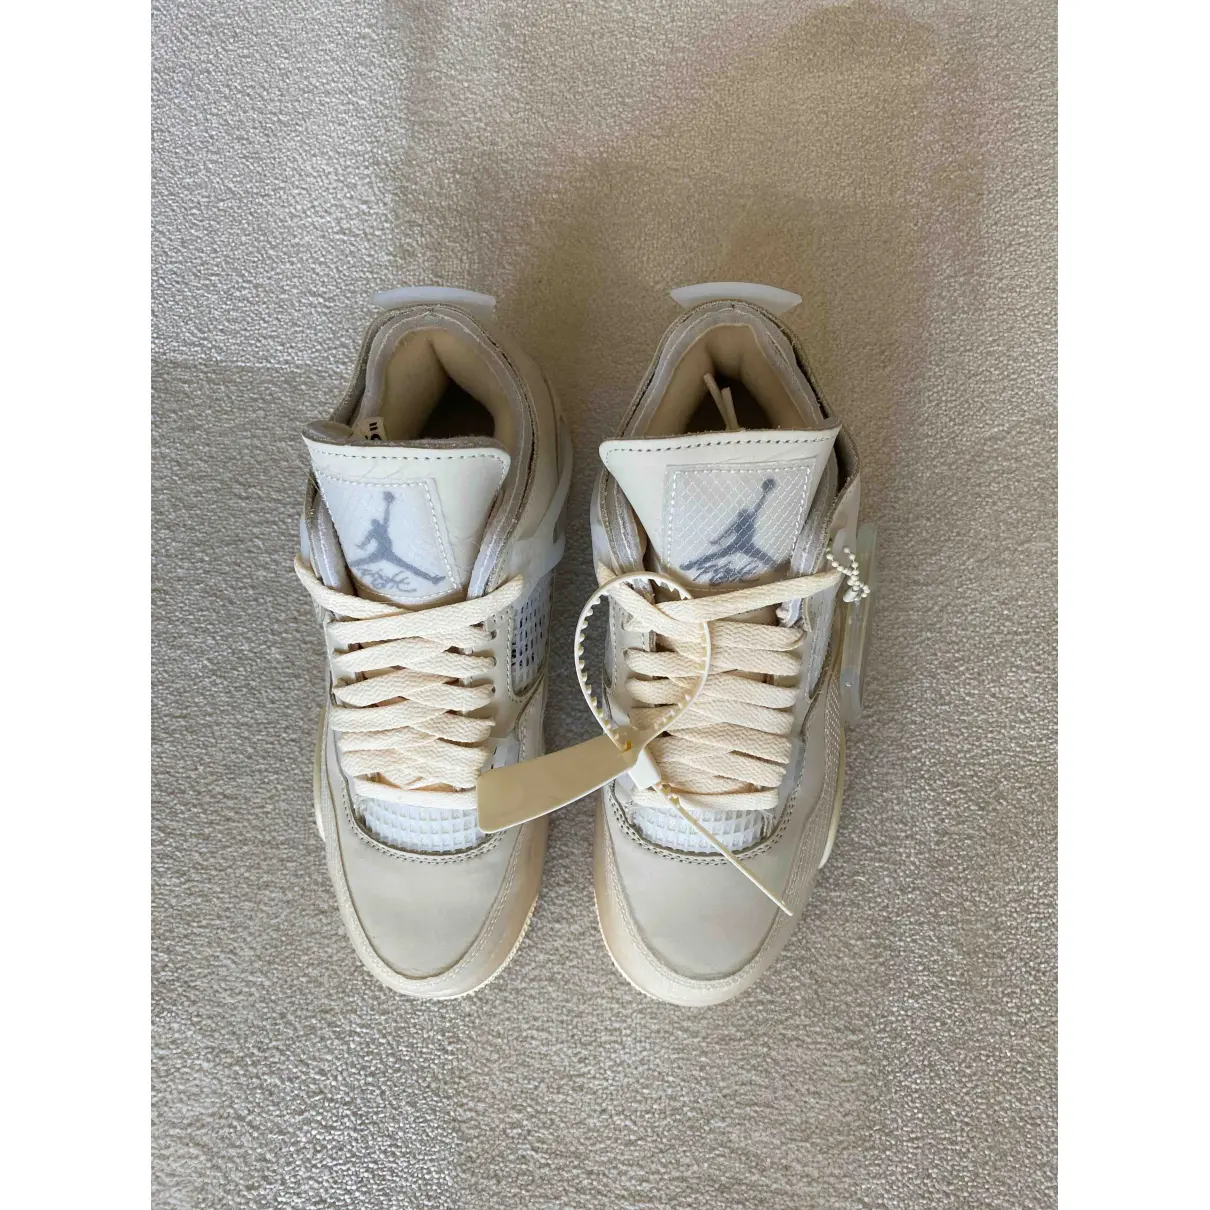 Buy Nike x Off-White Air Jordan 4 leather trainers online